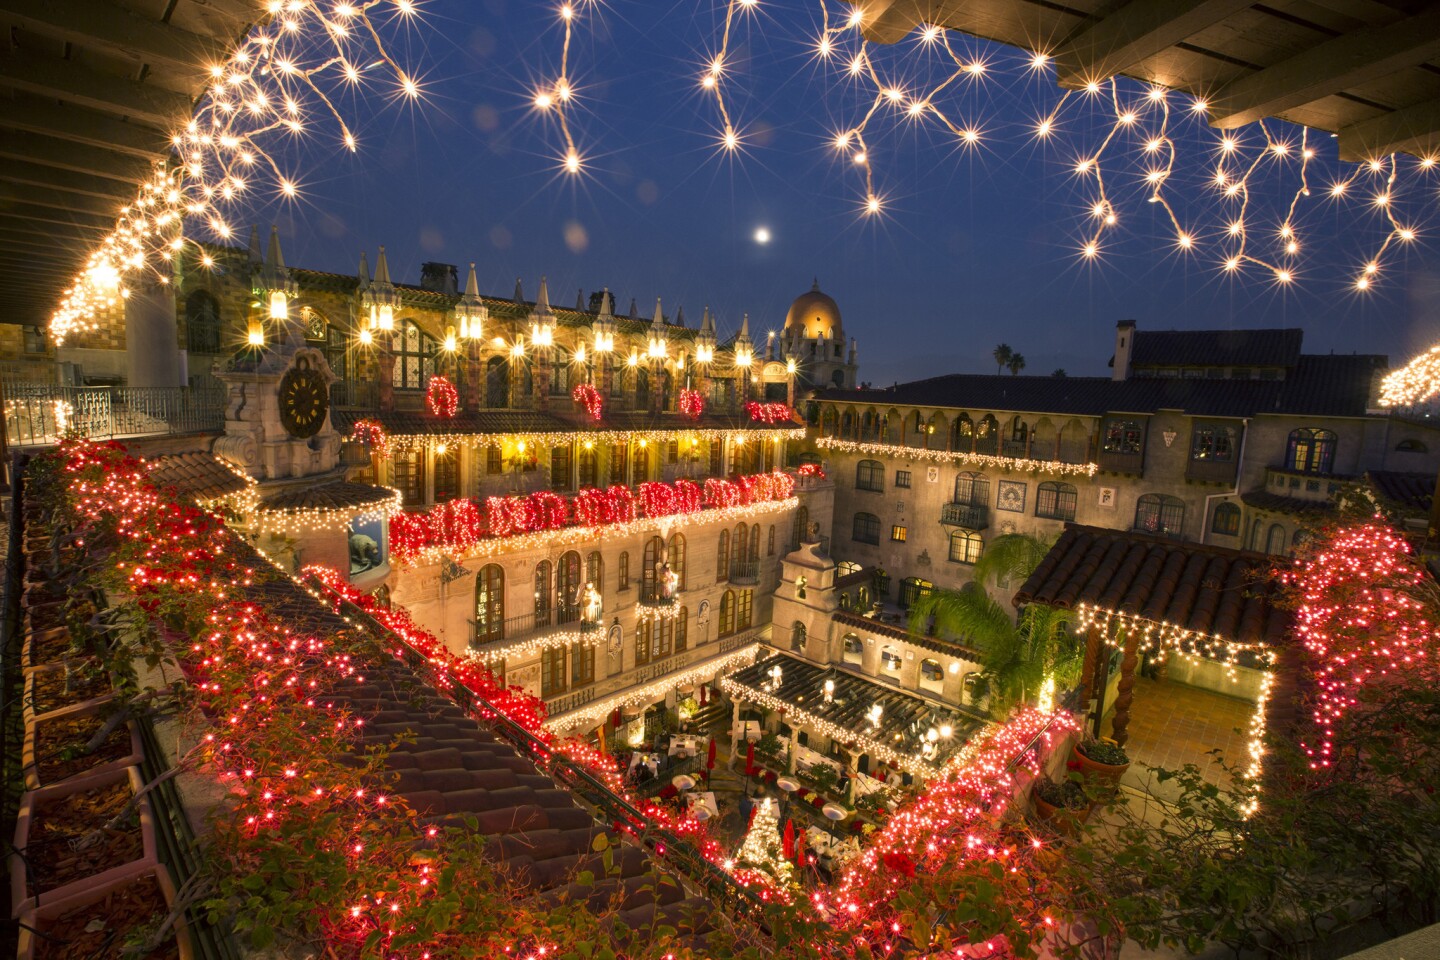 A look at the Mission Inn's courtyard during the 2016 Festival of Lights.